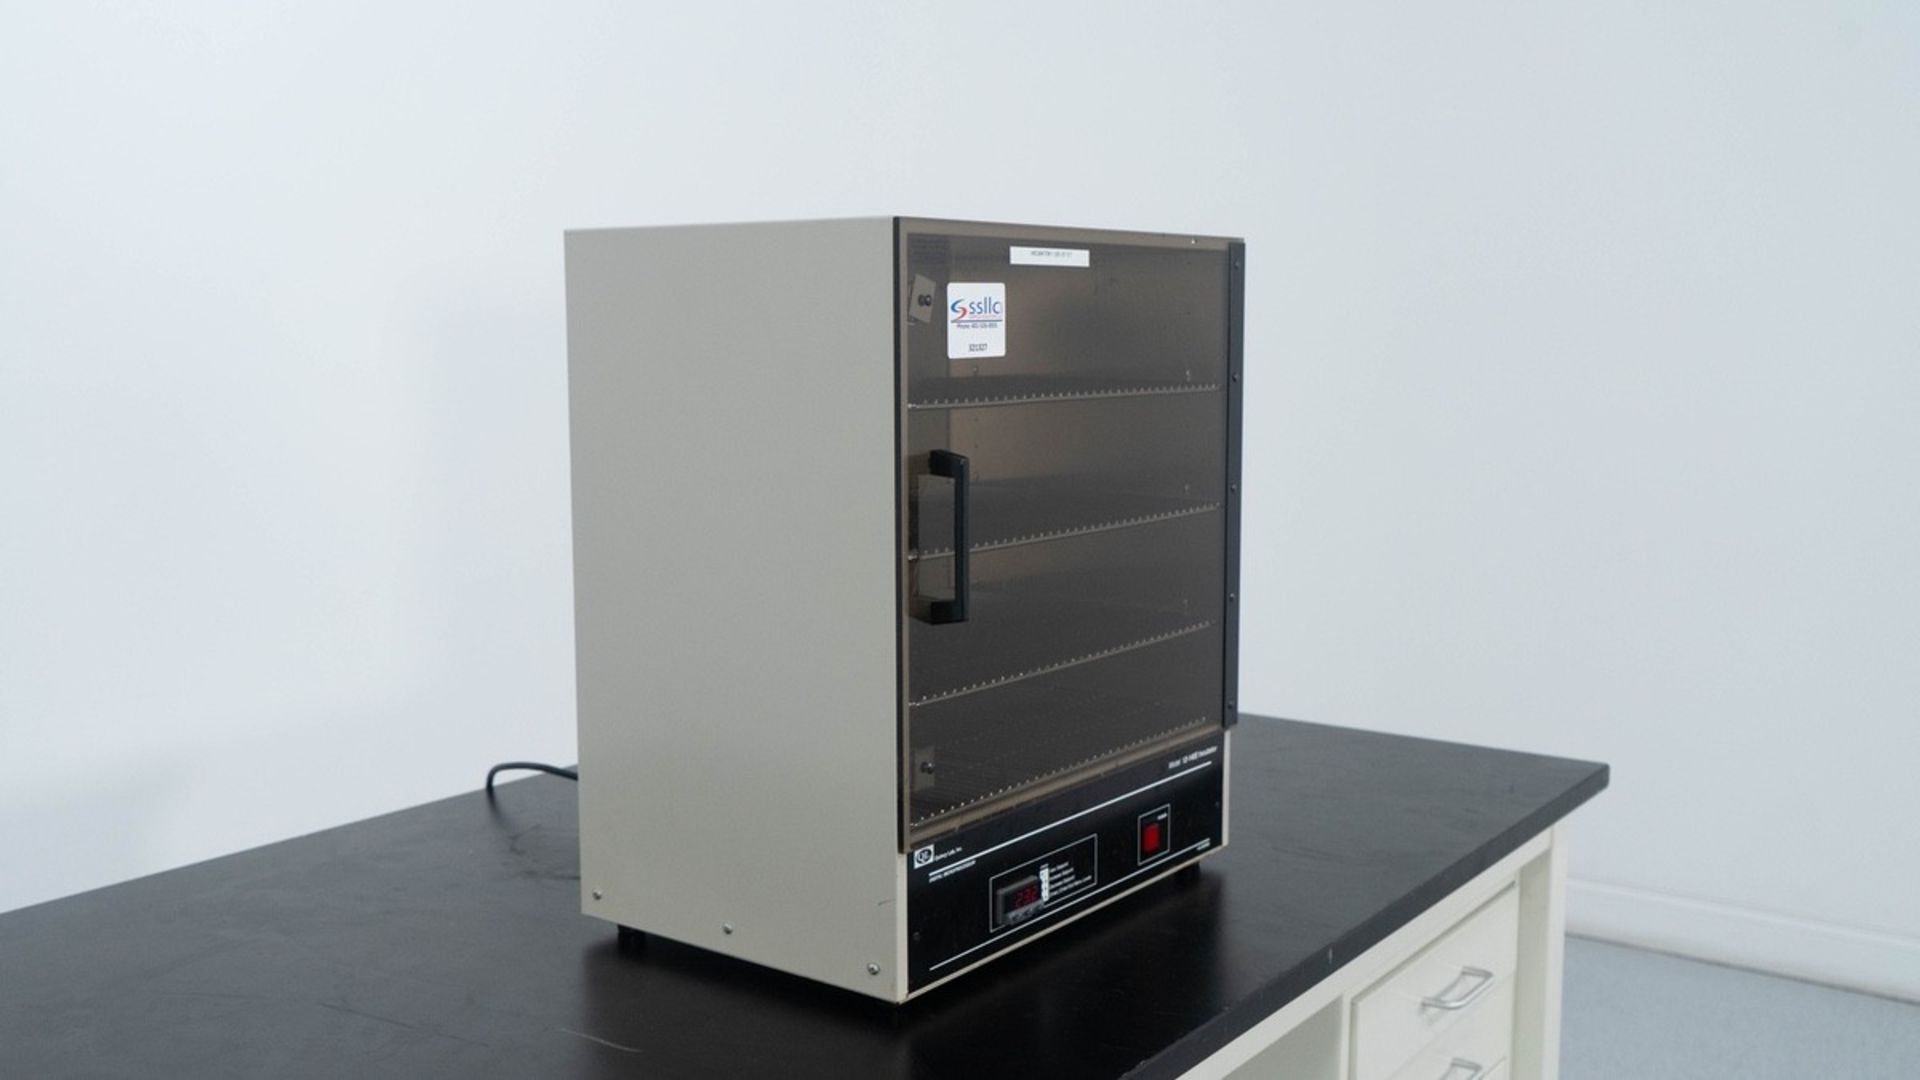 Quincy Lab 12-140E Benchtop Incubator, Model 12-140E, S/N: P-00676, Electrical: 115 | Rig Fee: $25 - Image 2 of 5